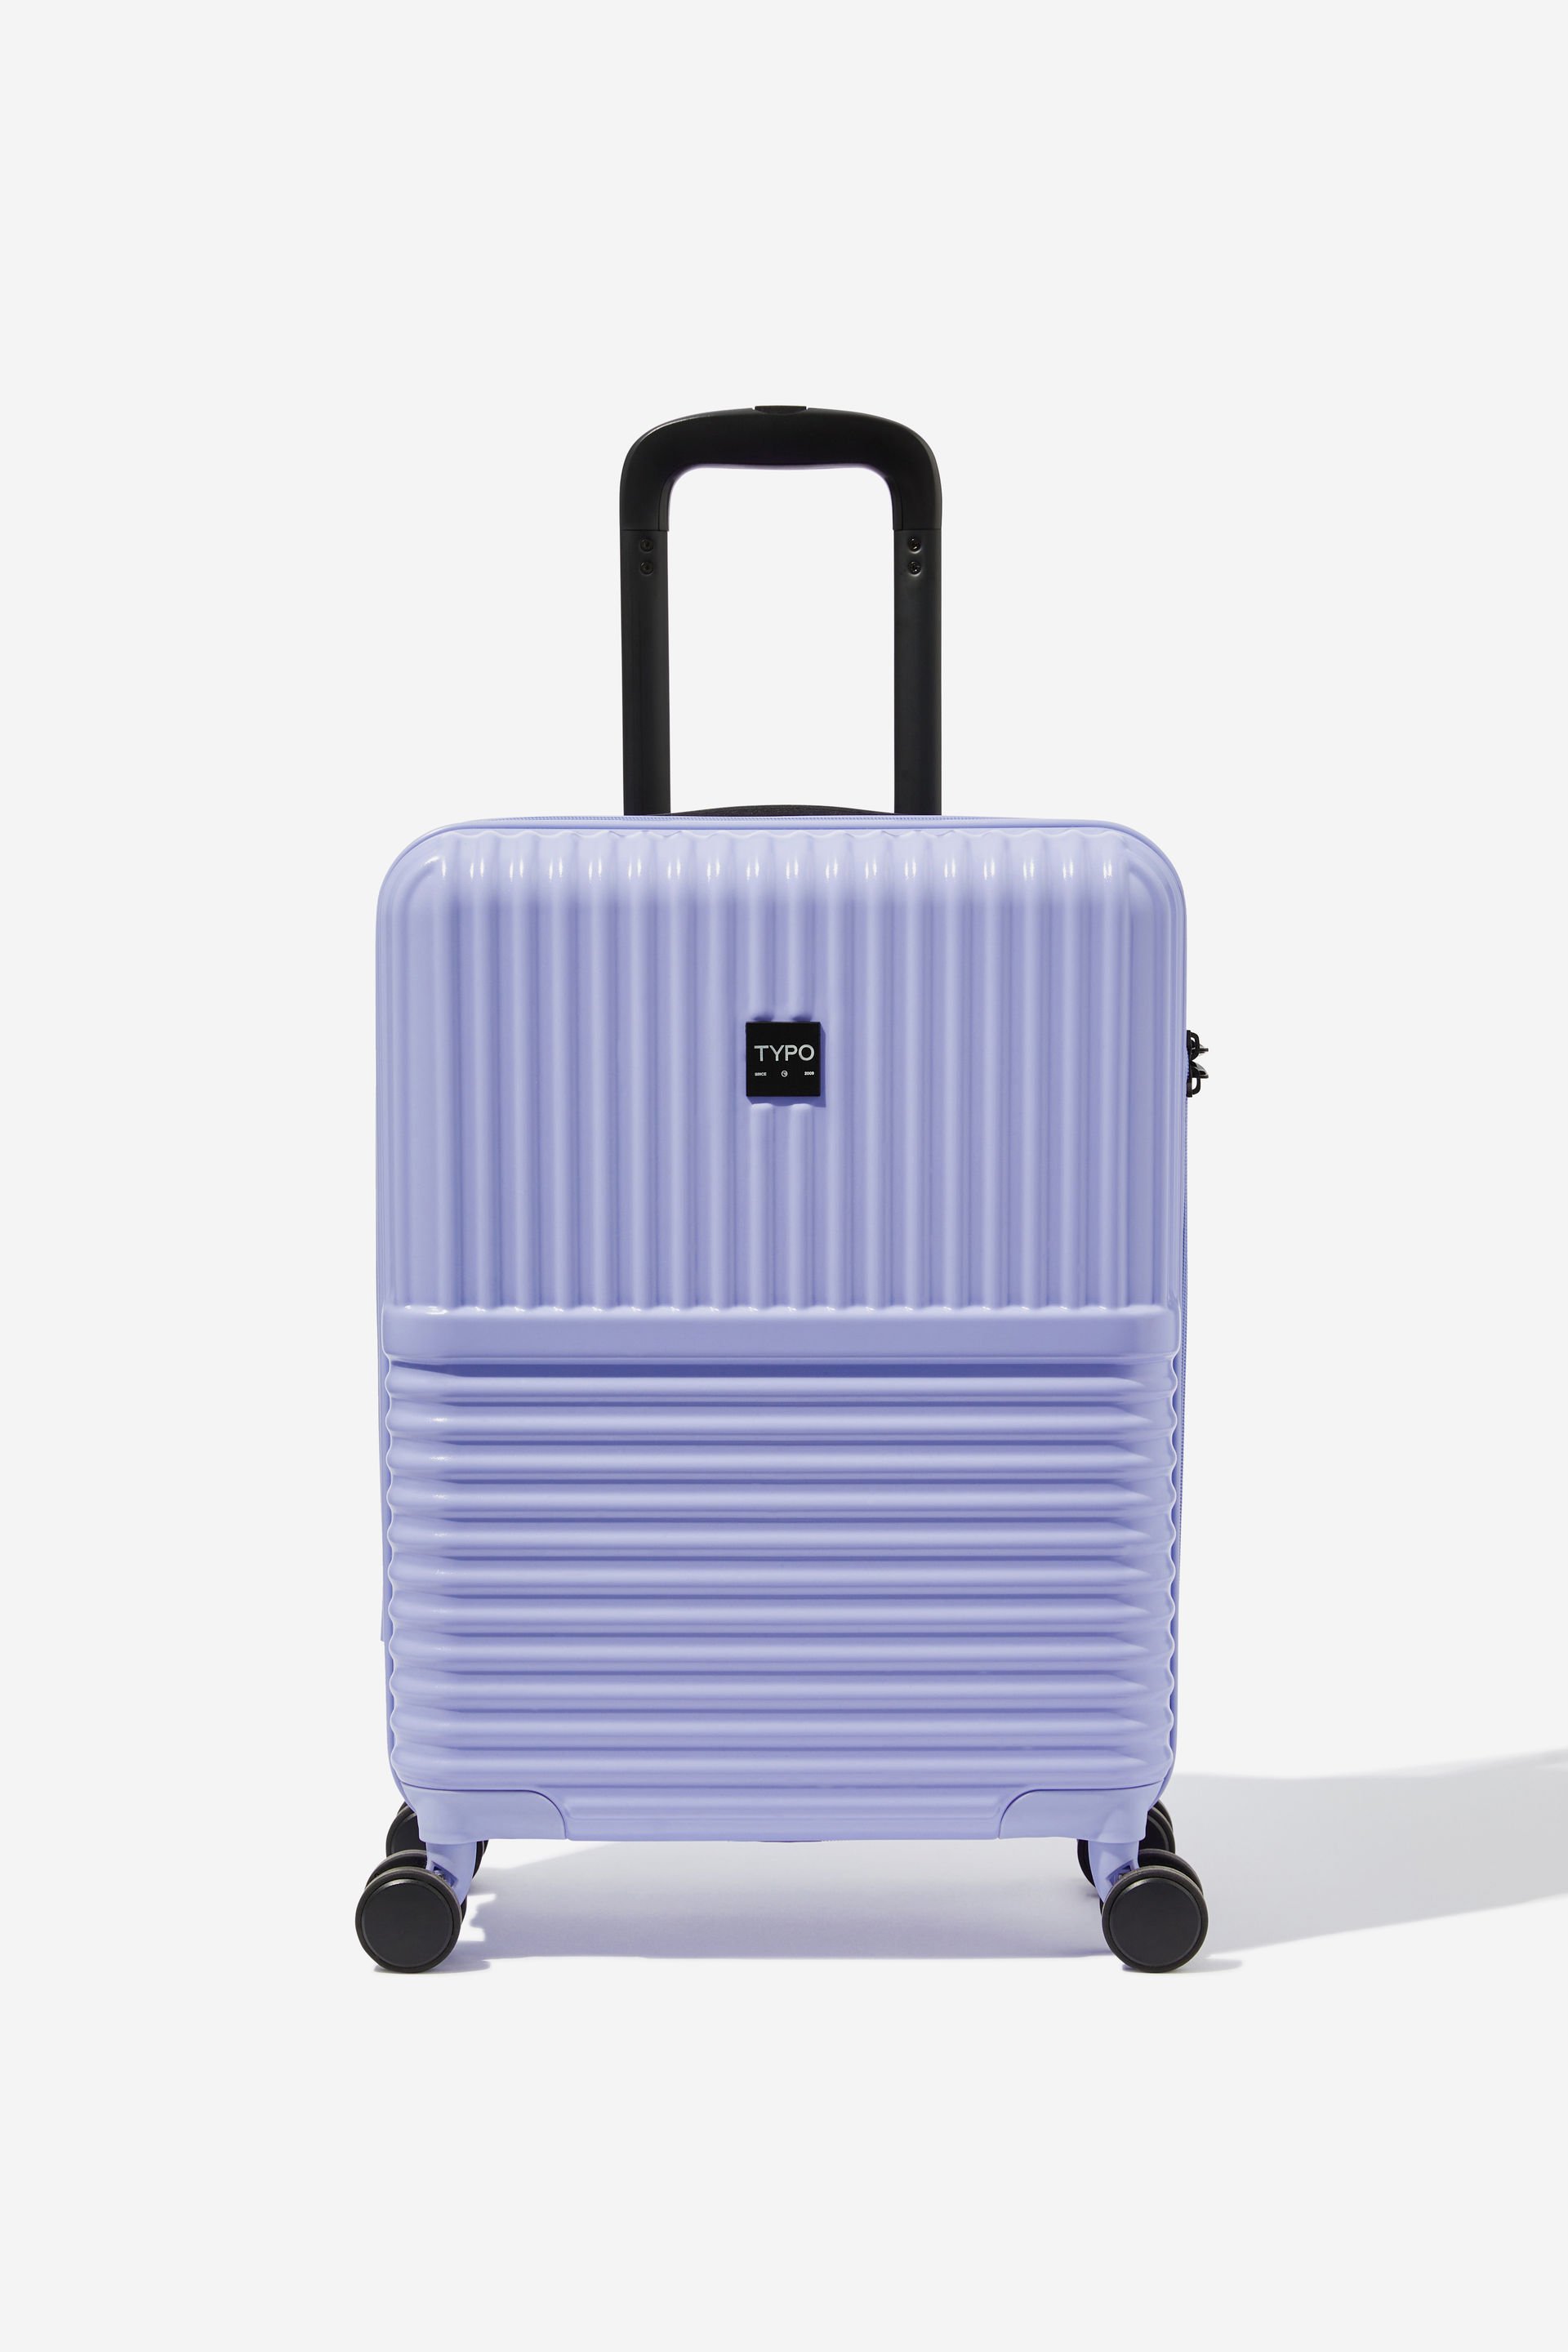 Typo - 20 Inch Carry On Suitcase - Soft lilac